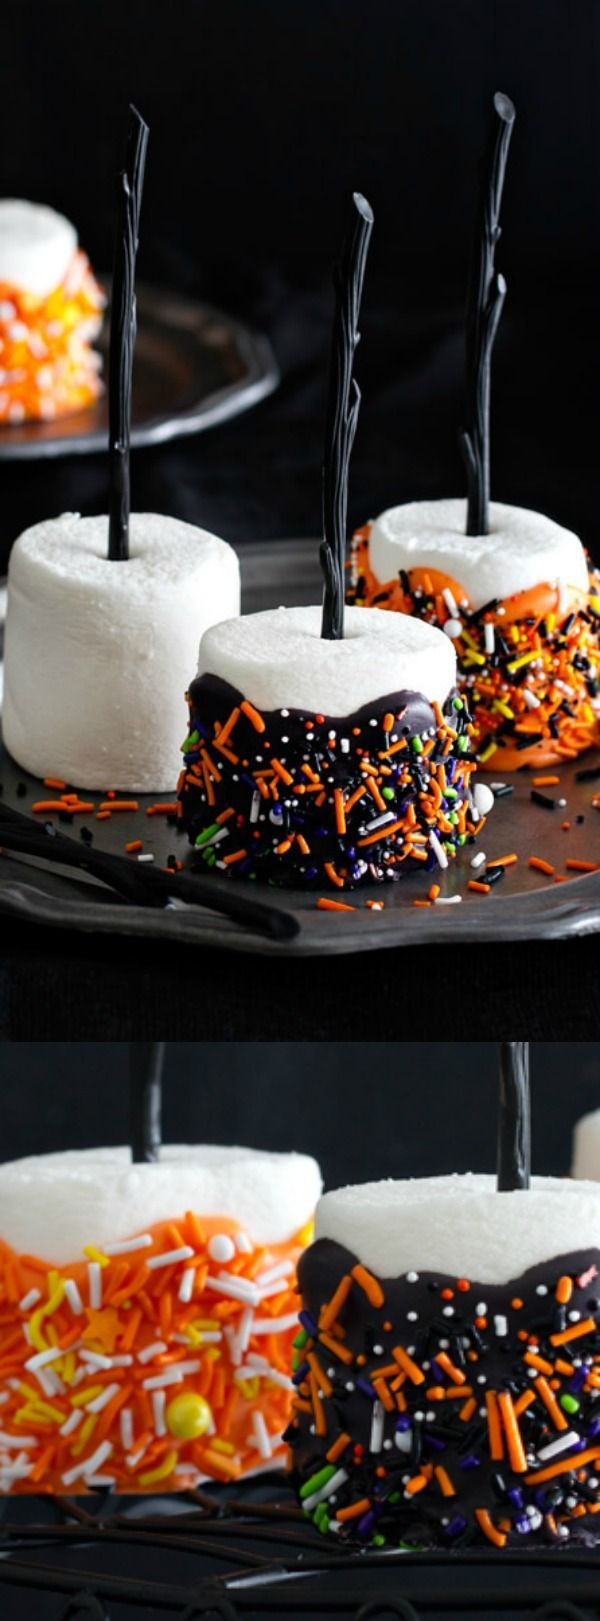 Halloween Desserts Pictures
 These Halloween Marshmallow Pops from My Baking Addiction